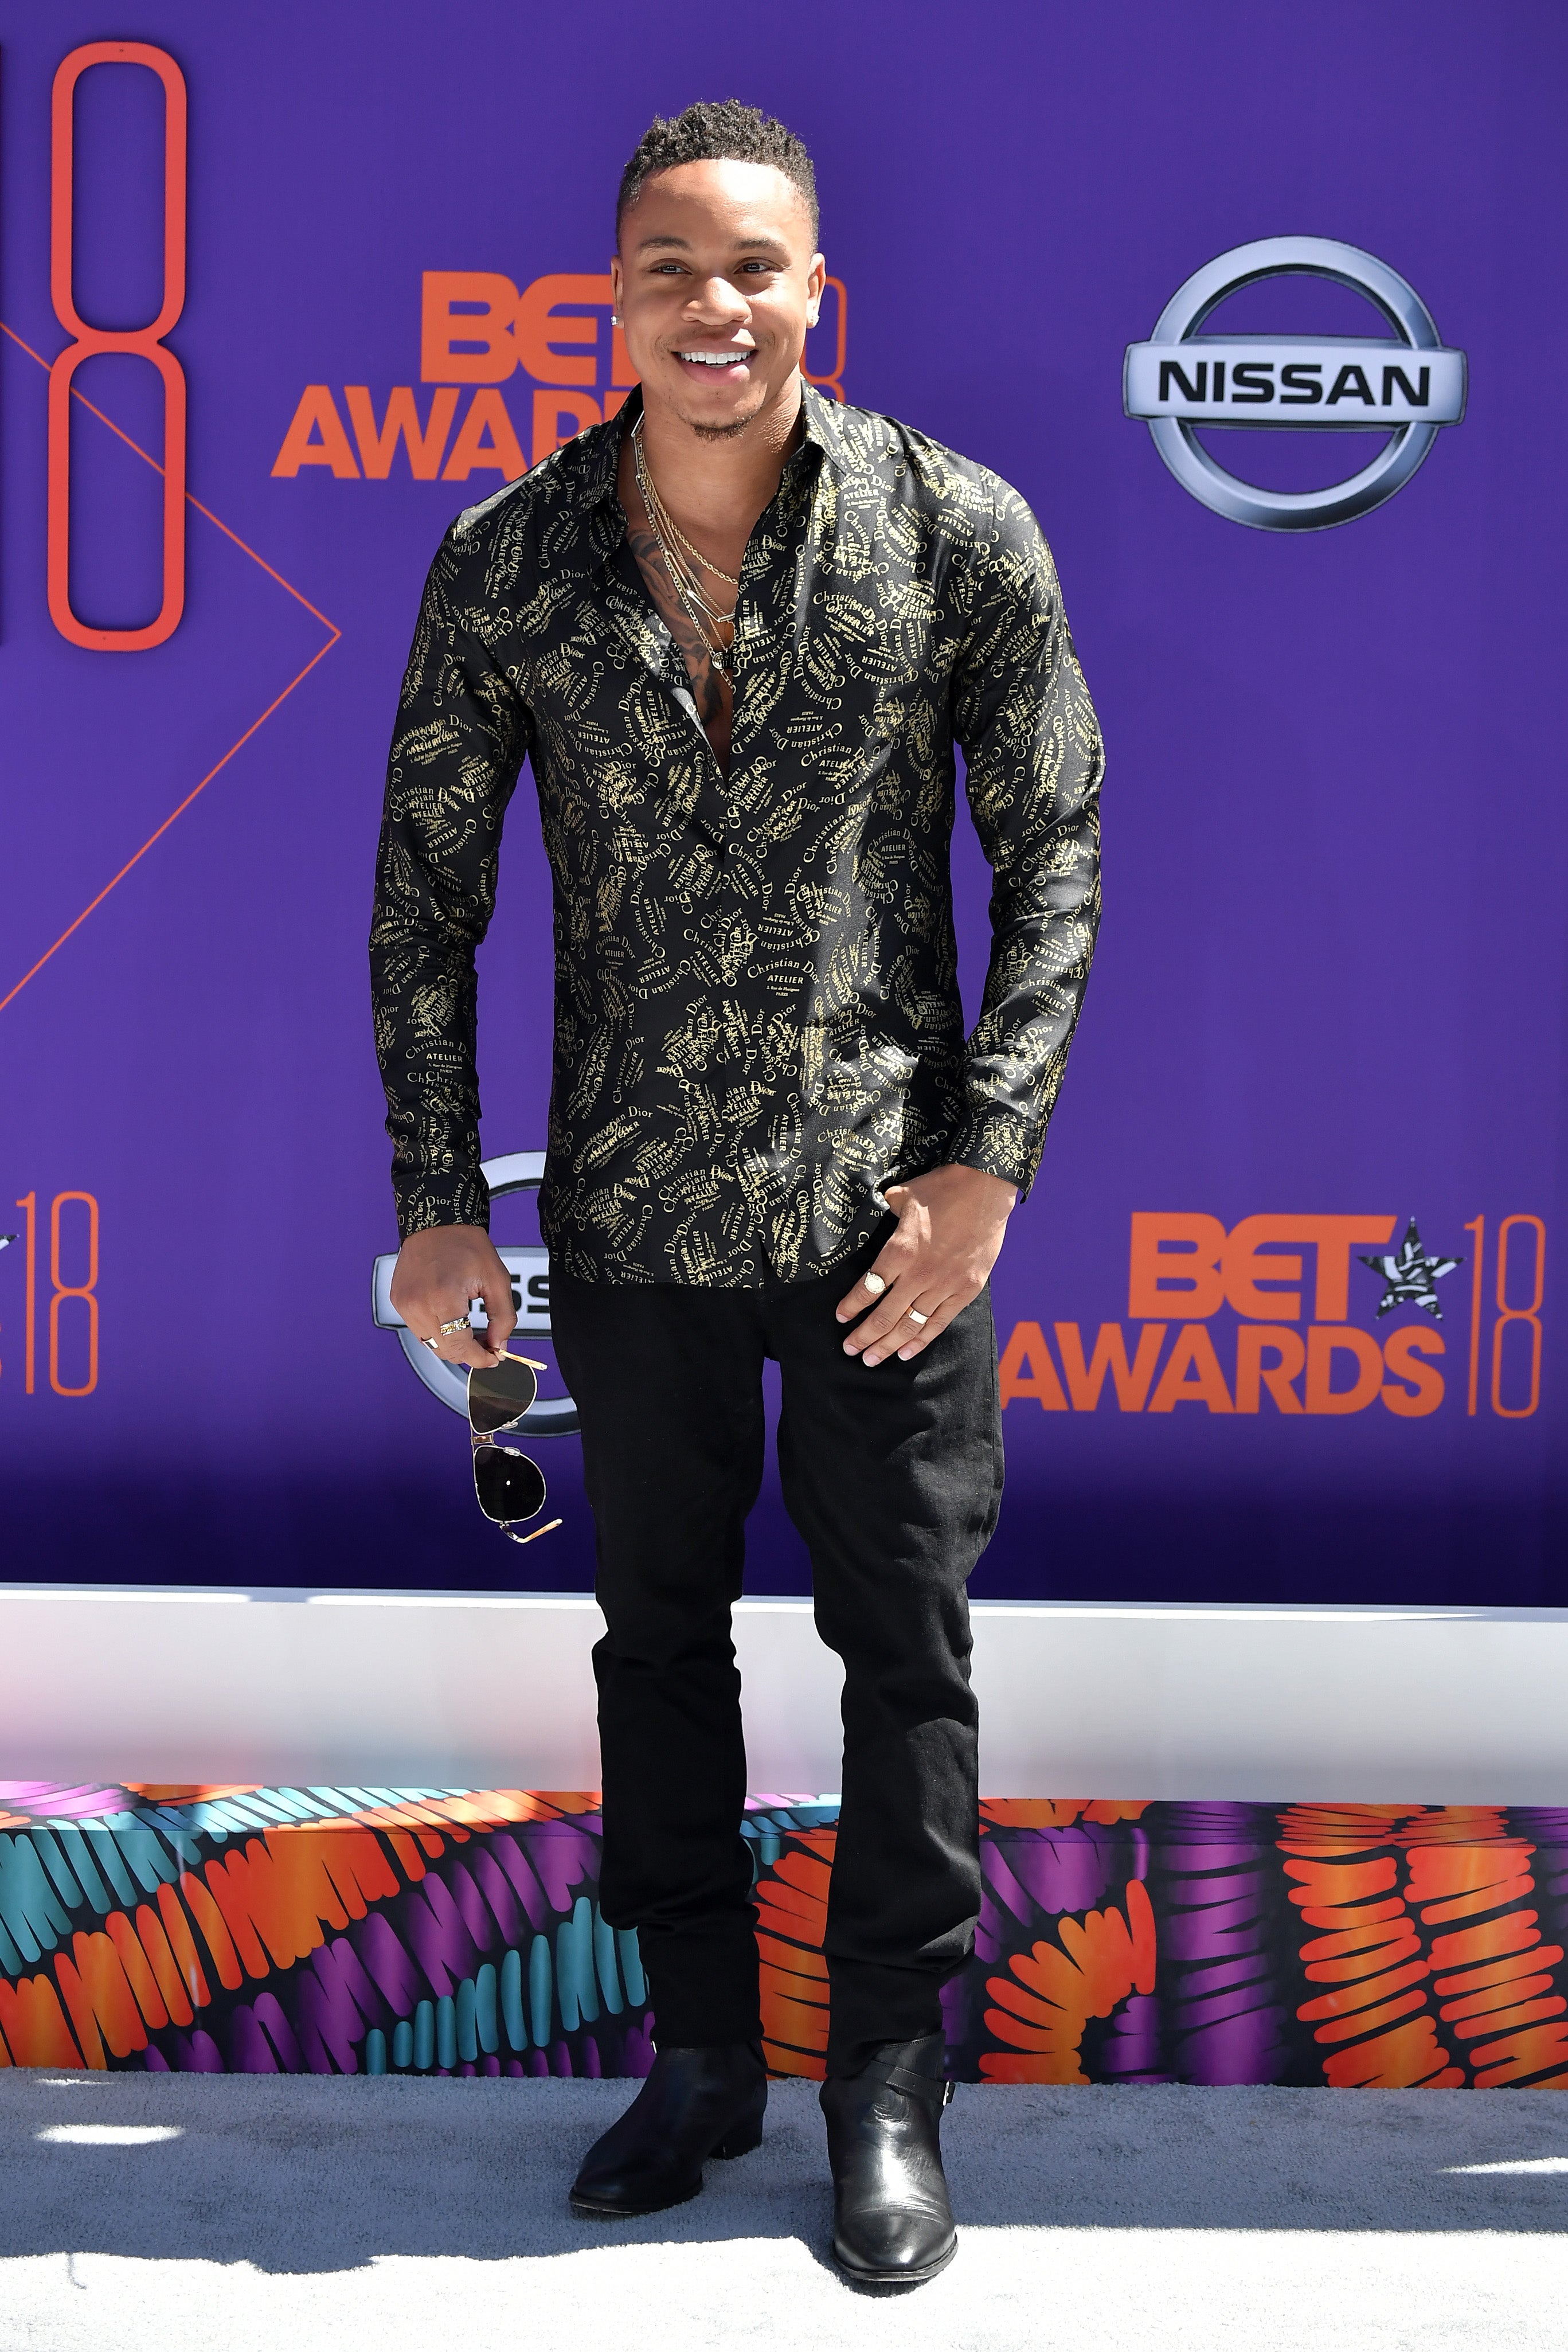 The Biggest And Brightest Black Stars Hit The 2018 BET Awards Red Carpet Looking Lovely
